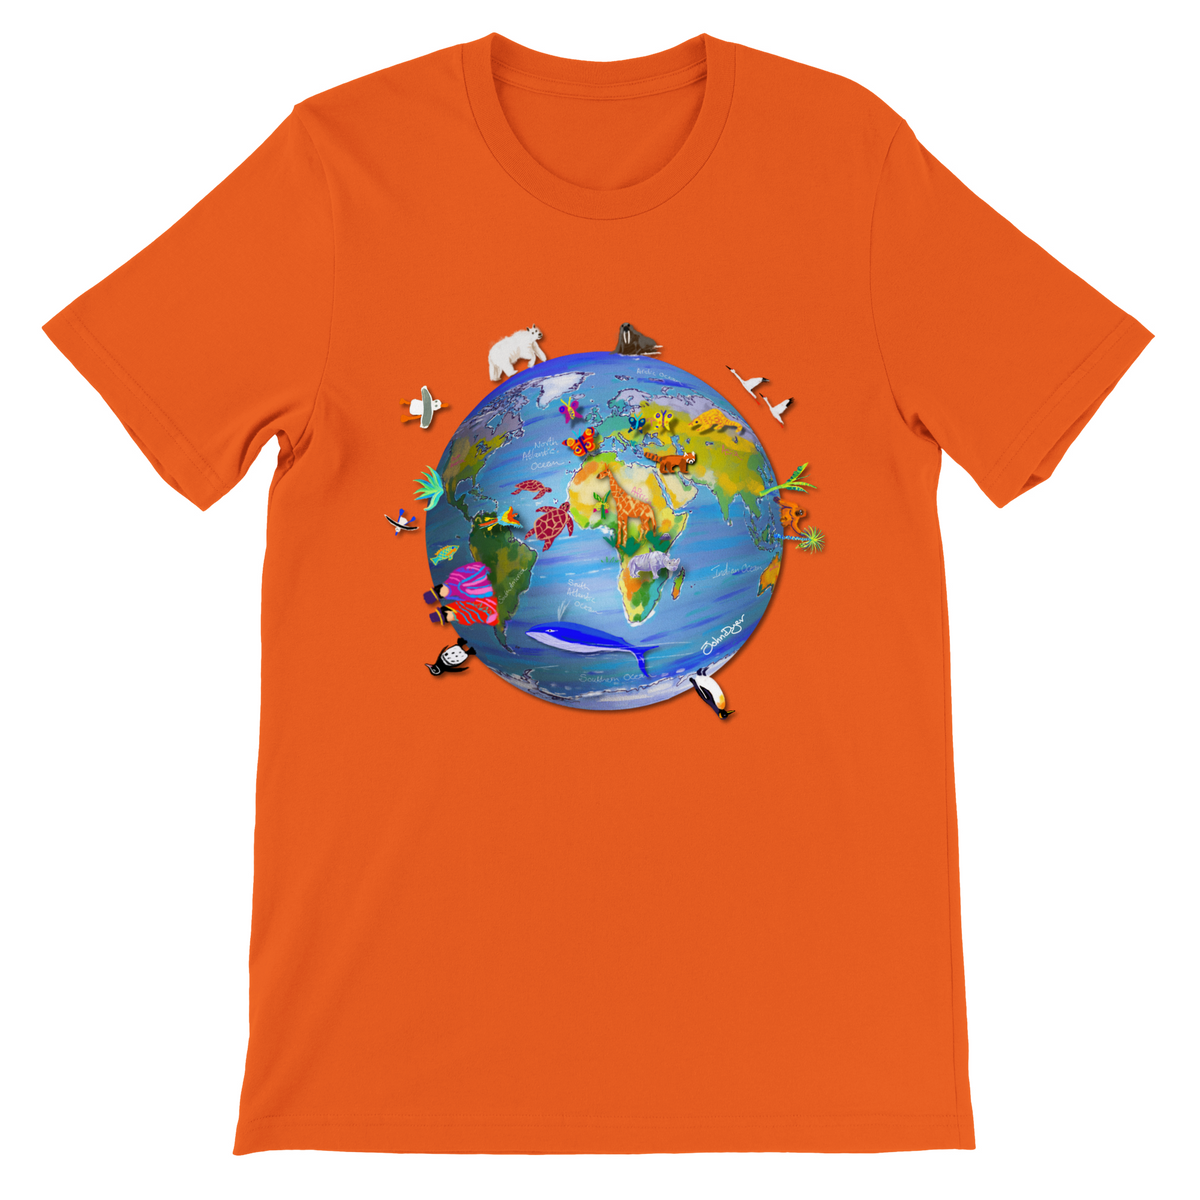 Orange Earth T-Shirt featuring art from John Dyer of planet earth, climate change and wildlife. This fantastic art earth t-shirt features a drawing of planet earth with endangered animals and environments. Unisex and eco-friendly. Free worldwide delivery.